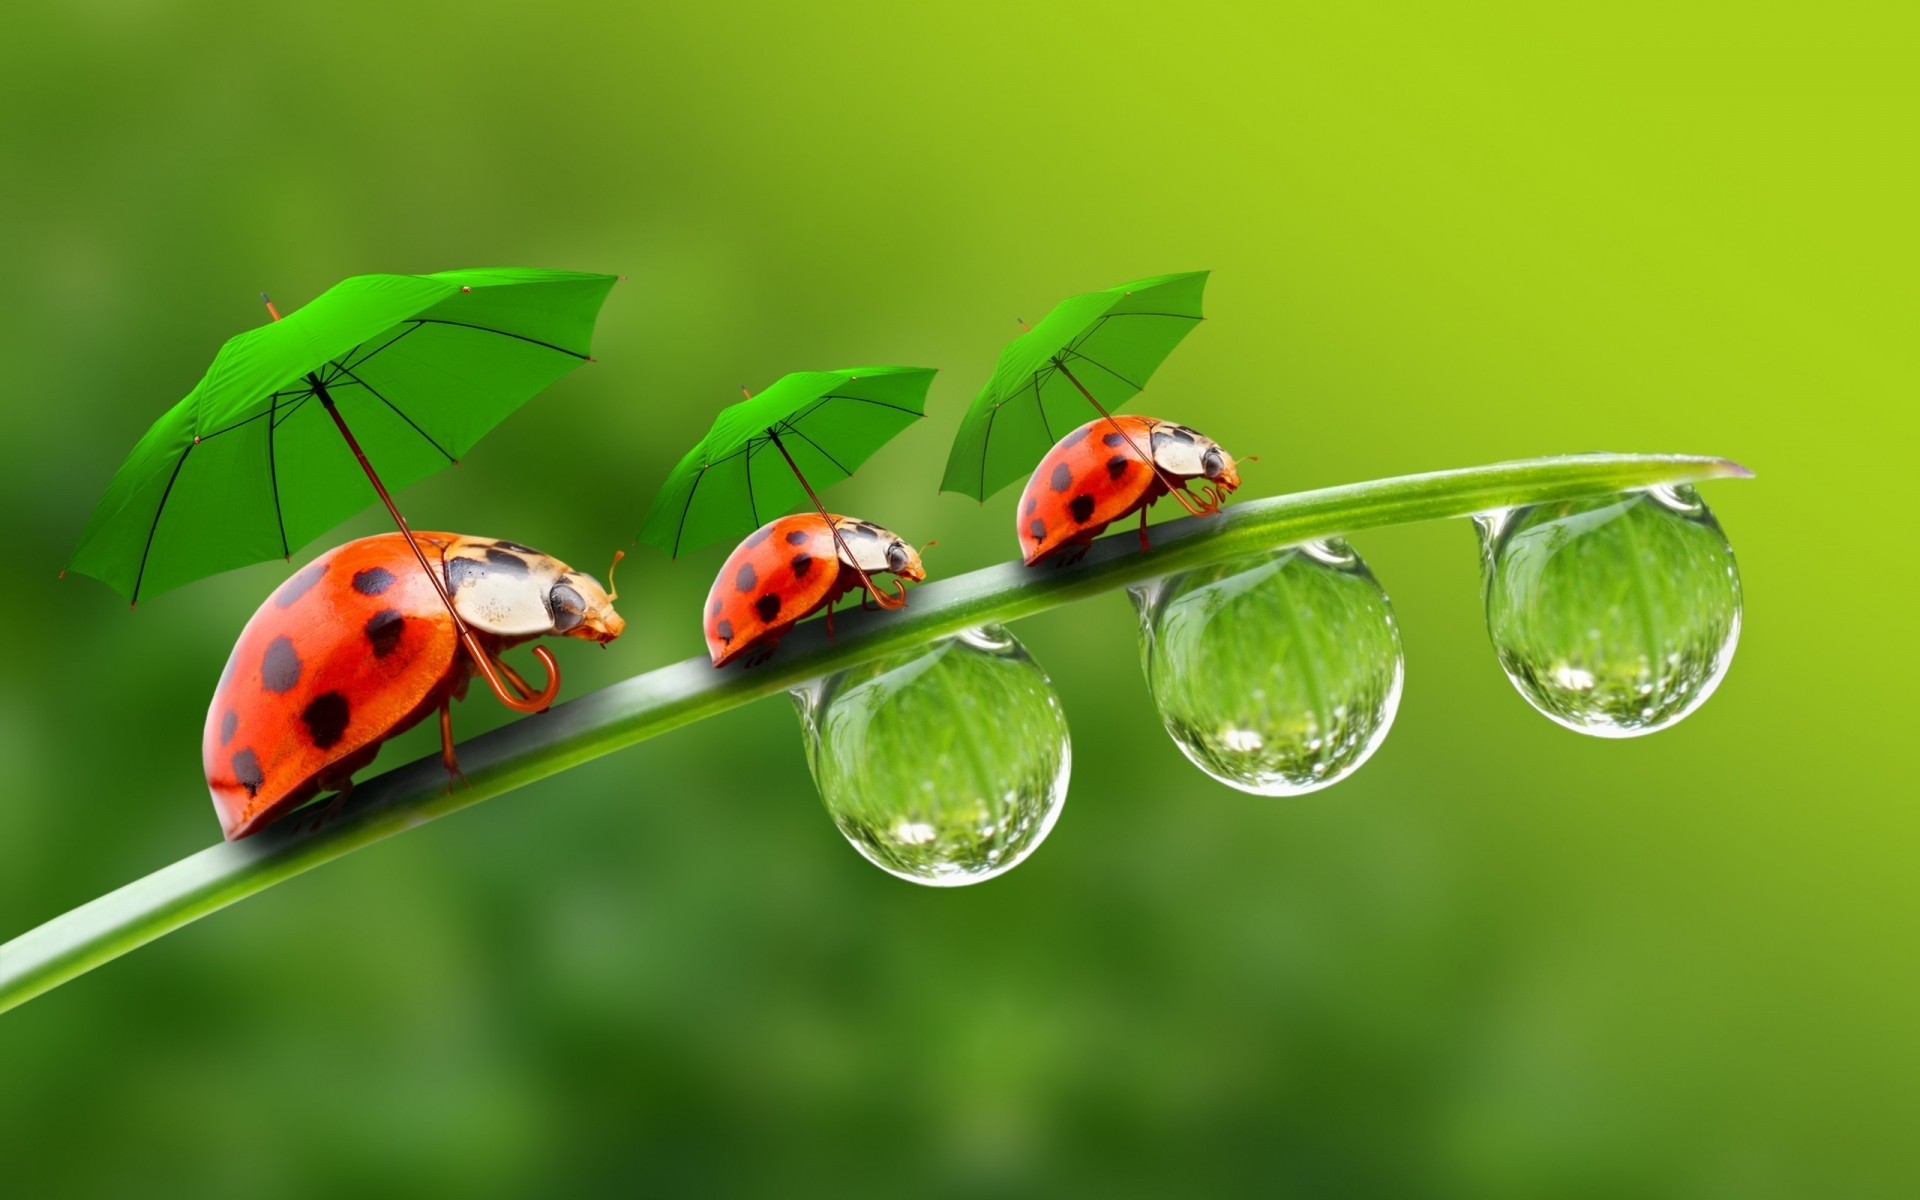 insects ladybug beetle dew rain insect leaf nature flora purity biology drop blade summer garden grass environment growth little bright ladybugs umbrellas droplets